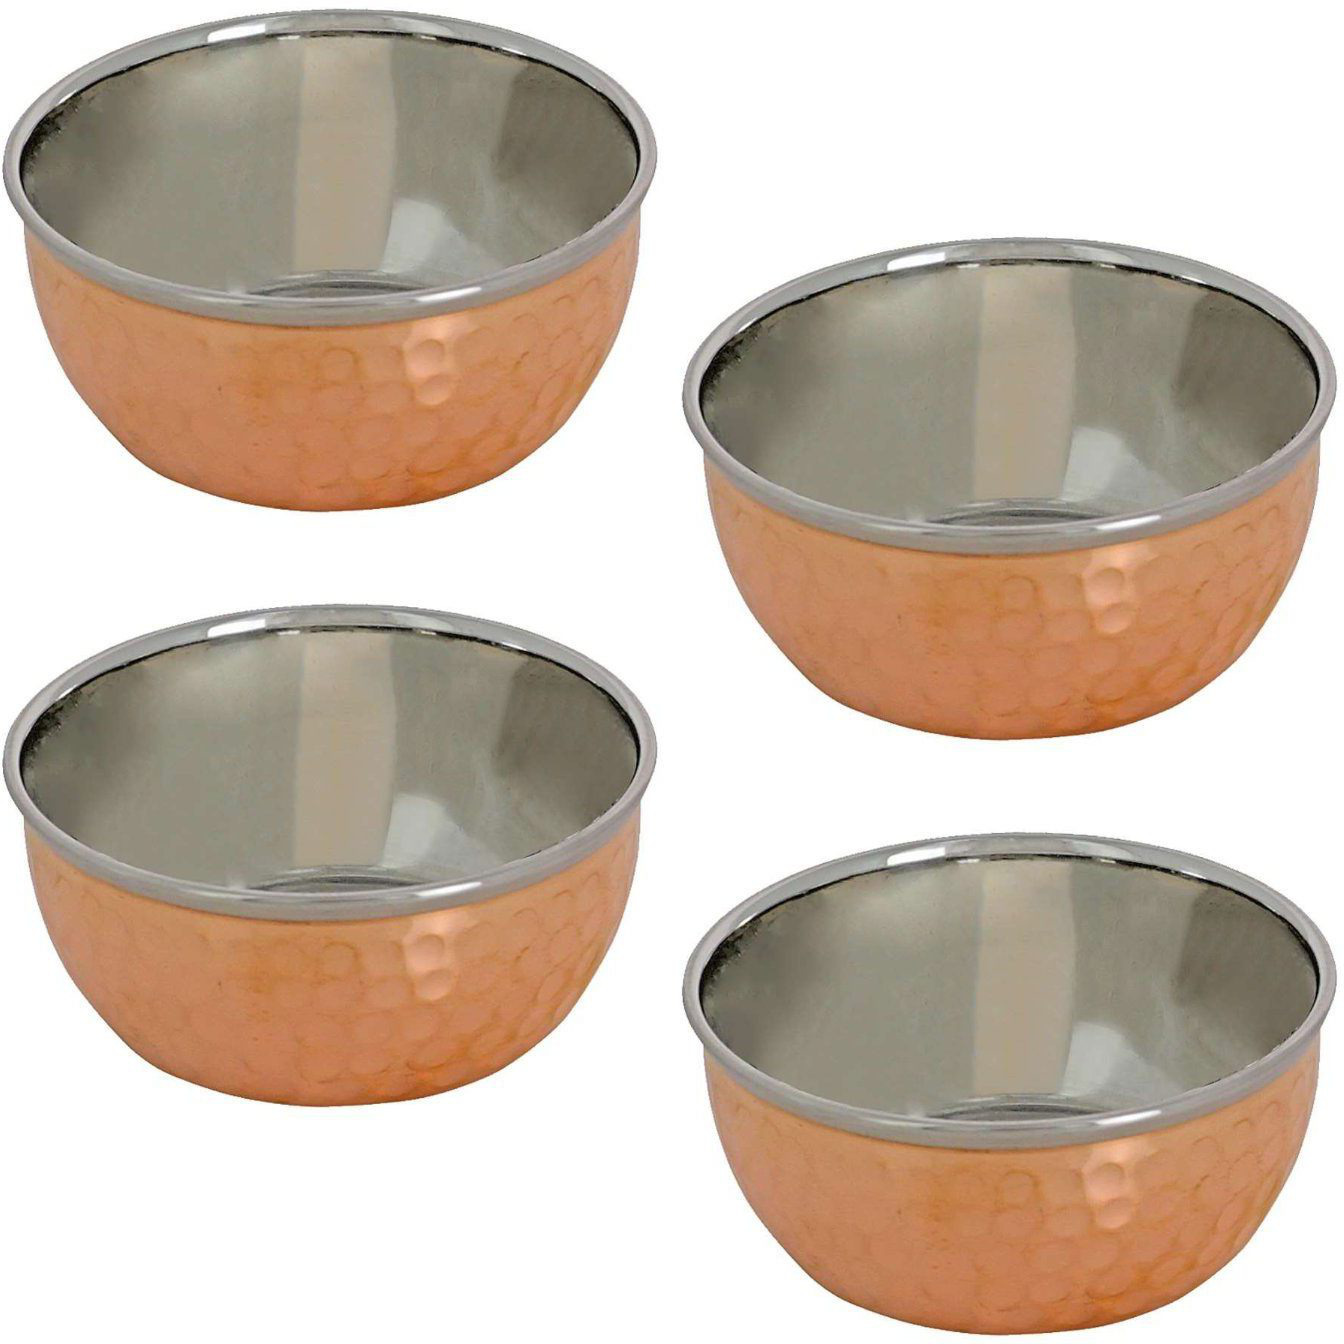 Prisha India Craft B. Set of 4 Dinnerware Traditional Stainless Steel Copper Dinner Set of Thali Plate, Bowls, Glass and Spoons, Dia 13  With 1 Pure Copper Mughal Pitcher Jug - Christmas Gift